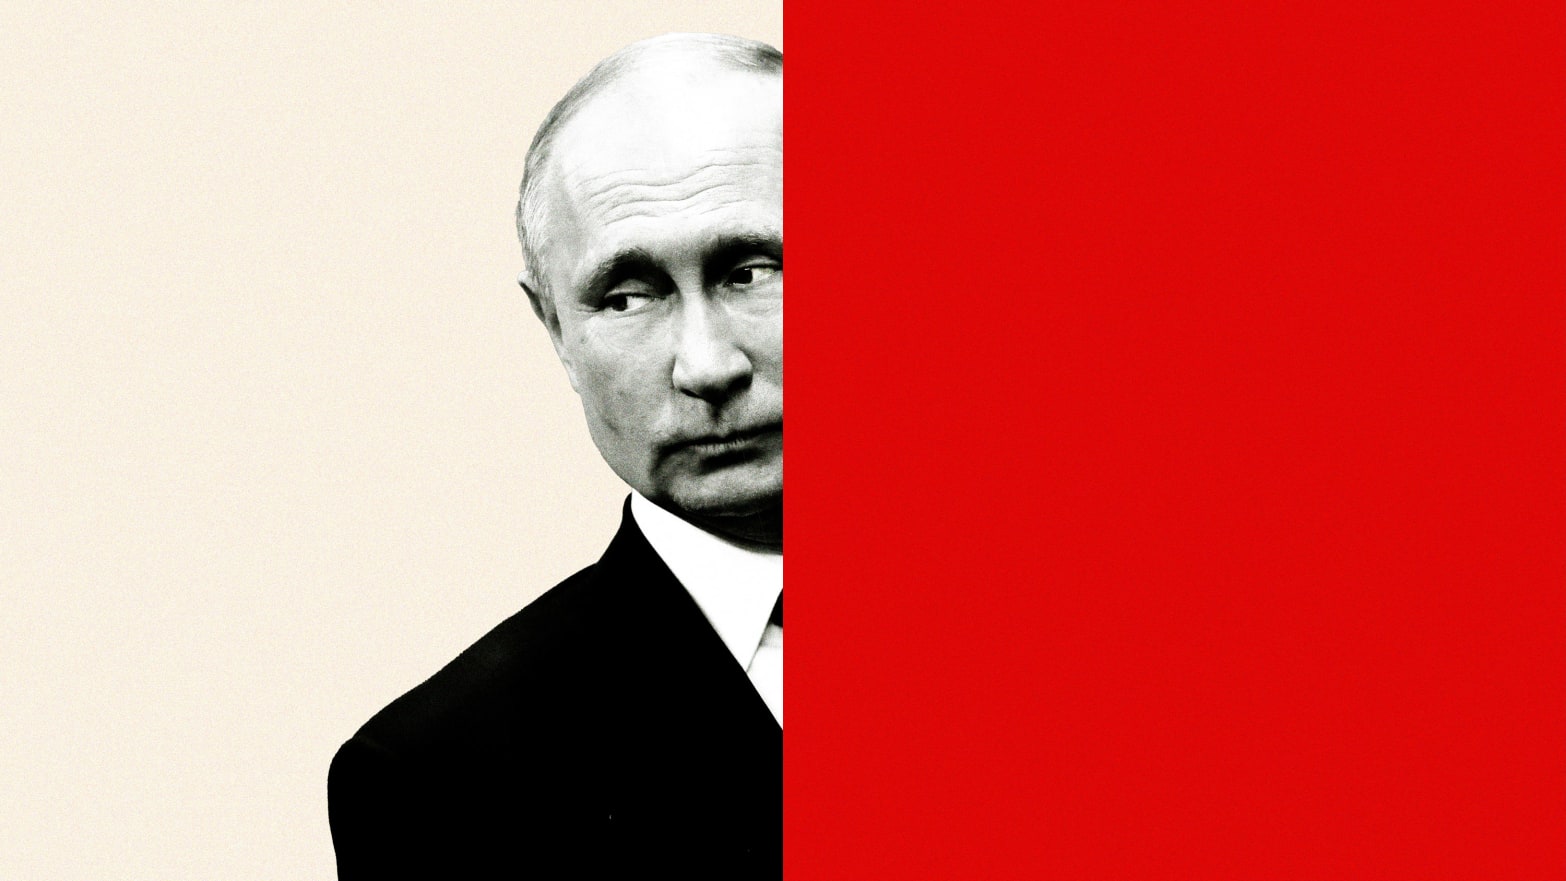 An illustration including a photo of Vladimir Putin and a Red rectangle.